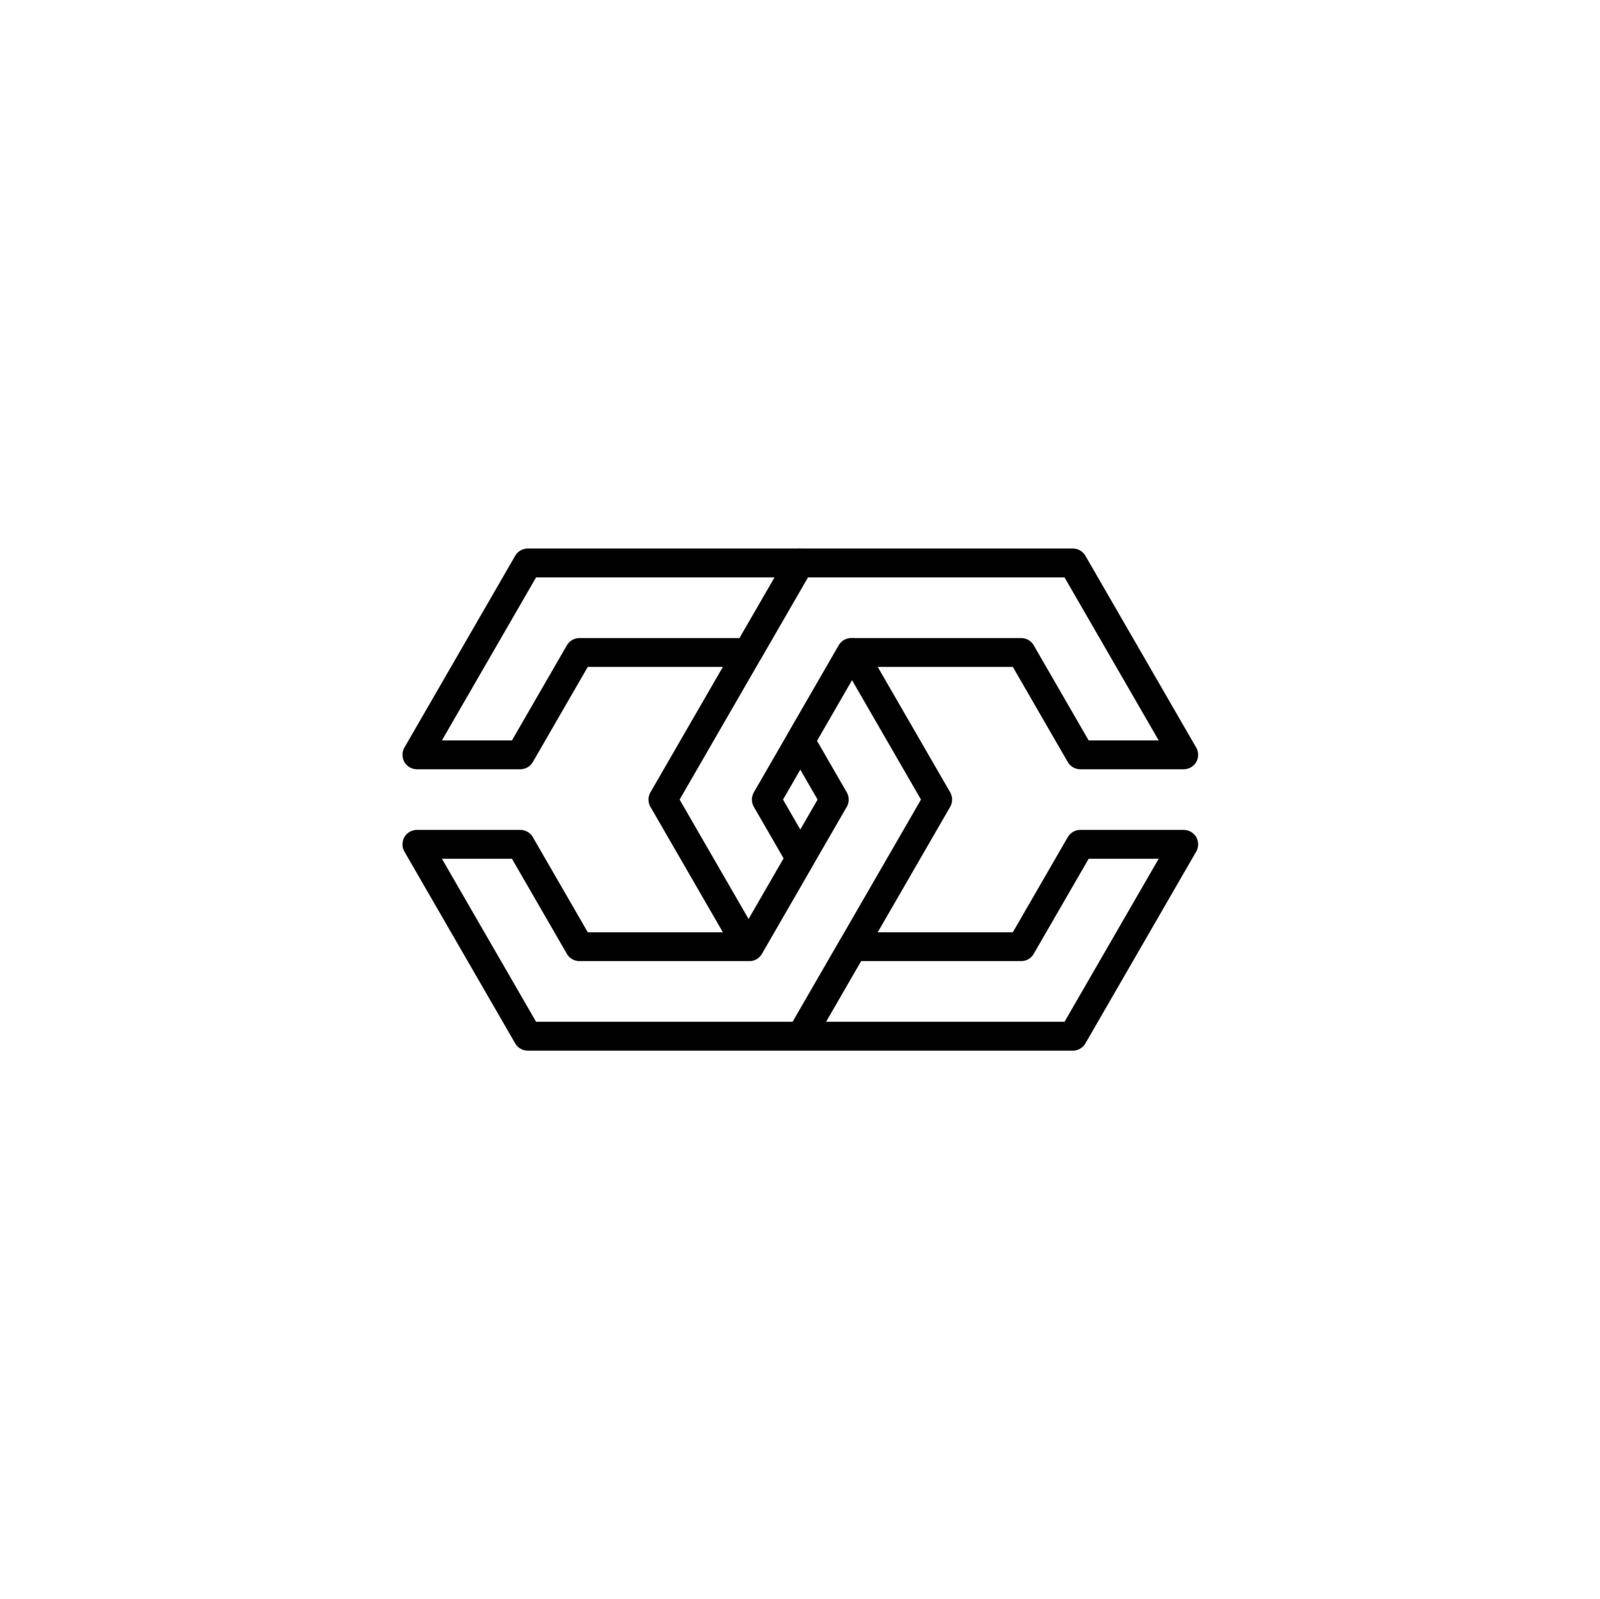 Stylized hexagon letter C with horizontal reflection for the company logo by Grommik